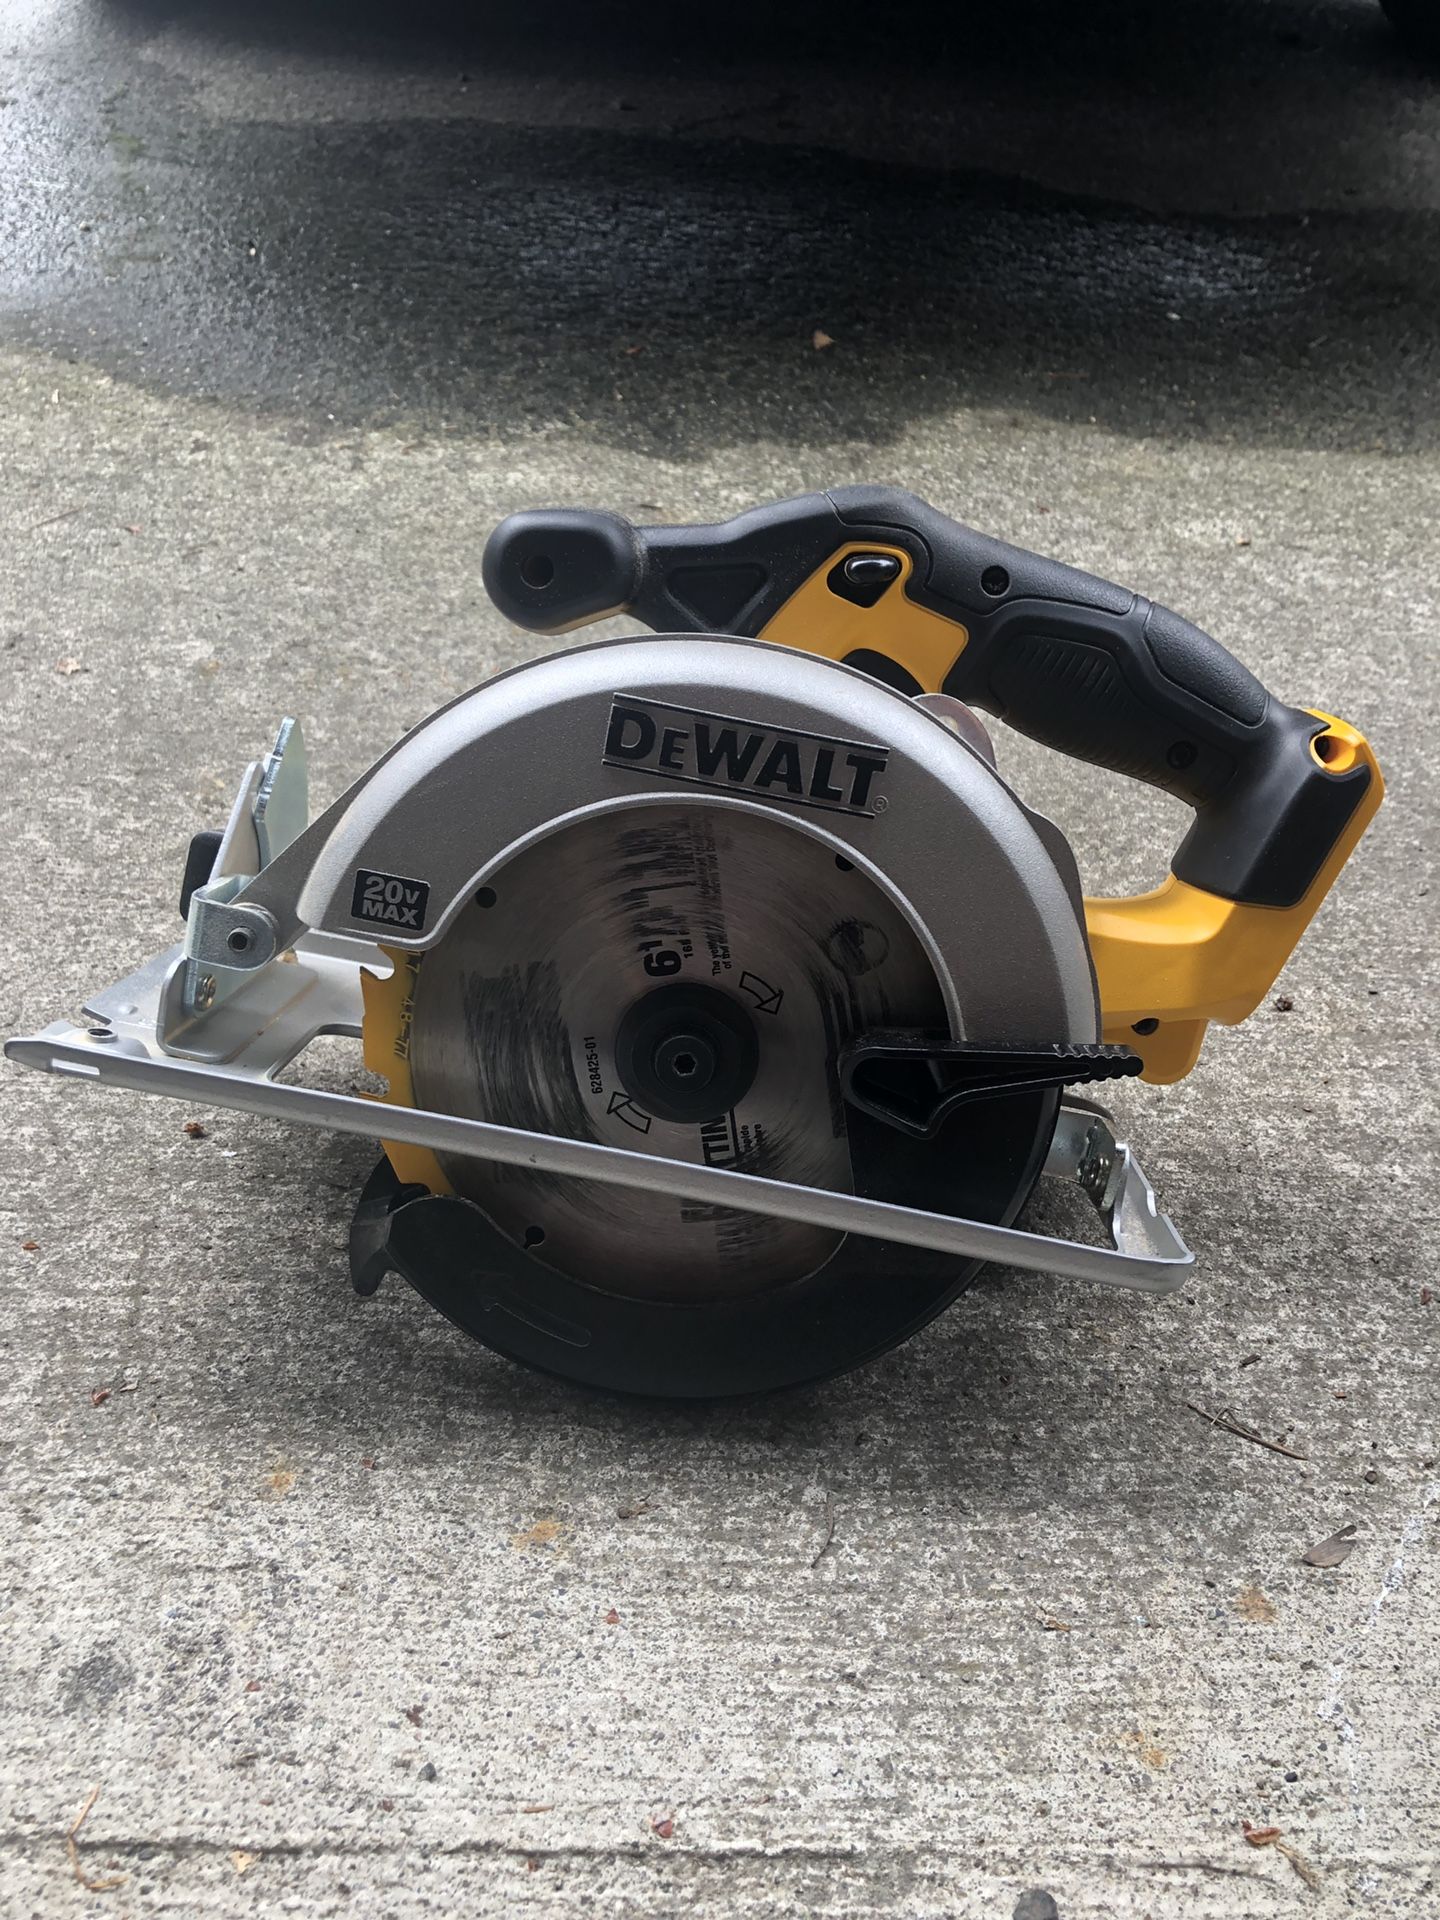 DEWALT 20-Volt Max 6-1/2-in Cordless Circular Saw with Brake and Magnesium Shoe (bare tool only)